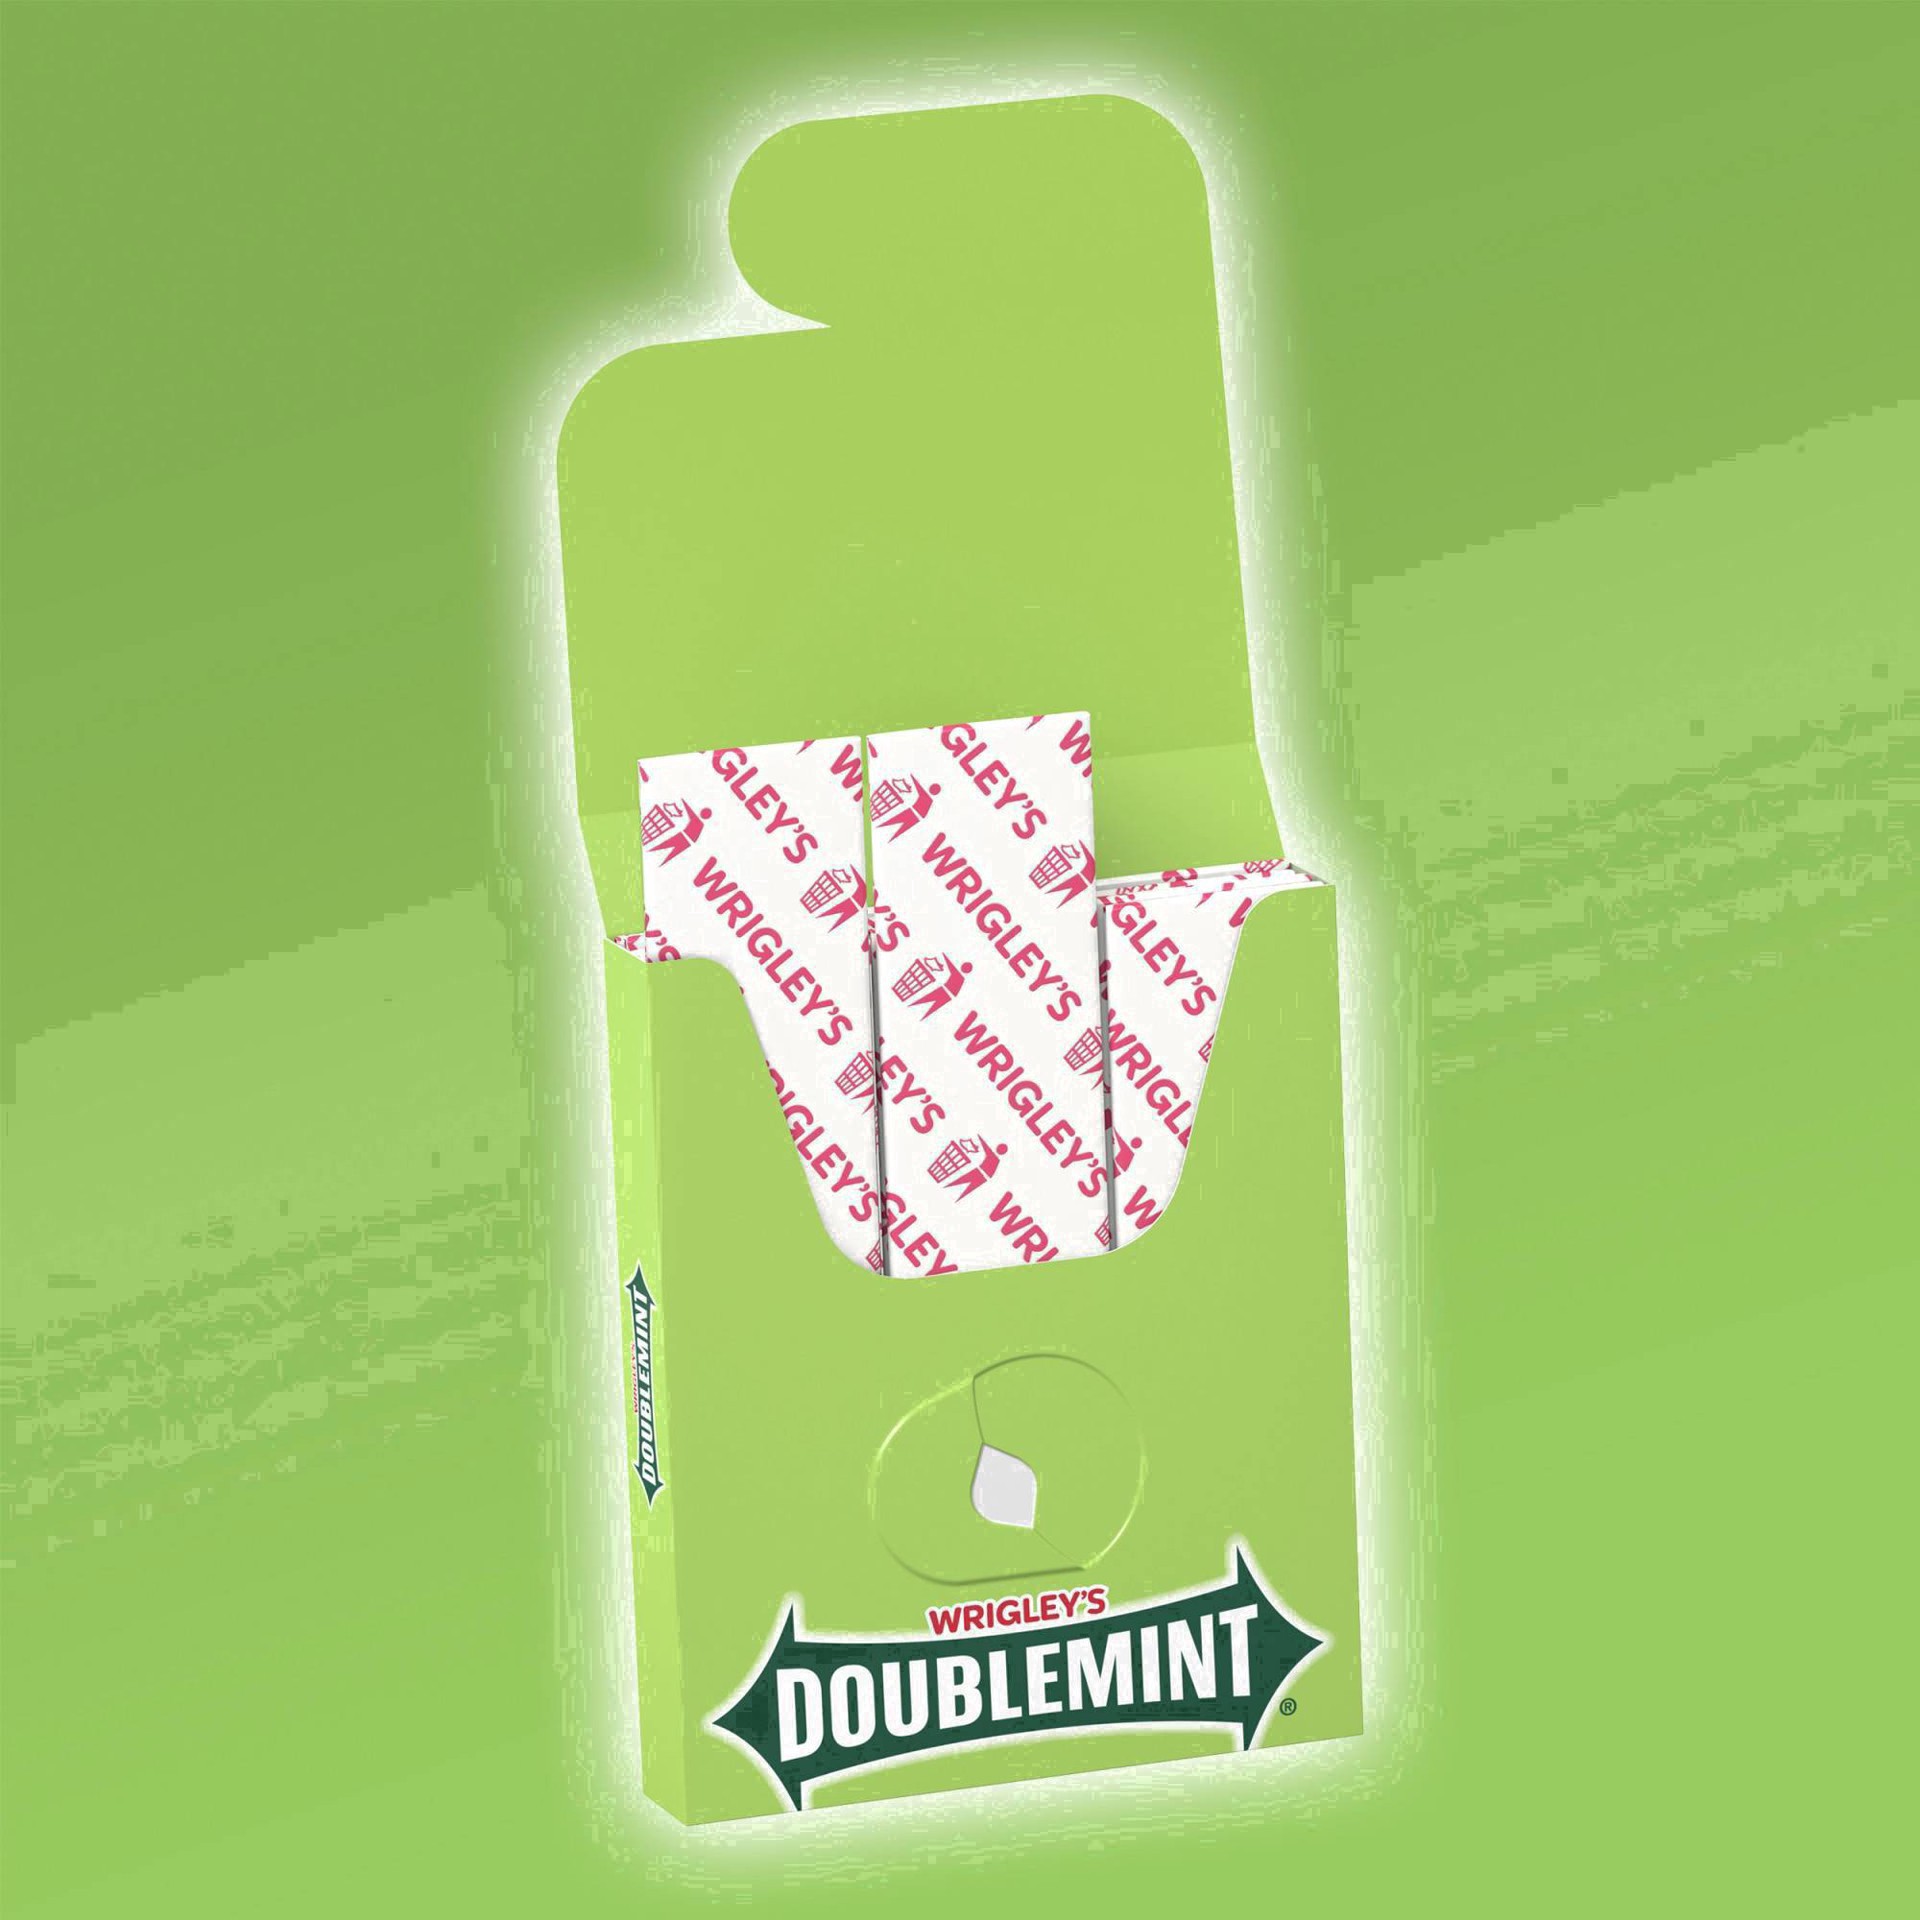 slide 40 of 134, Doublemint WRIGLEY'S DOUBLEMINT Bulk Chewing Gum, Value Pack, 15 ct (3 Pack), 45 ct